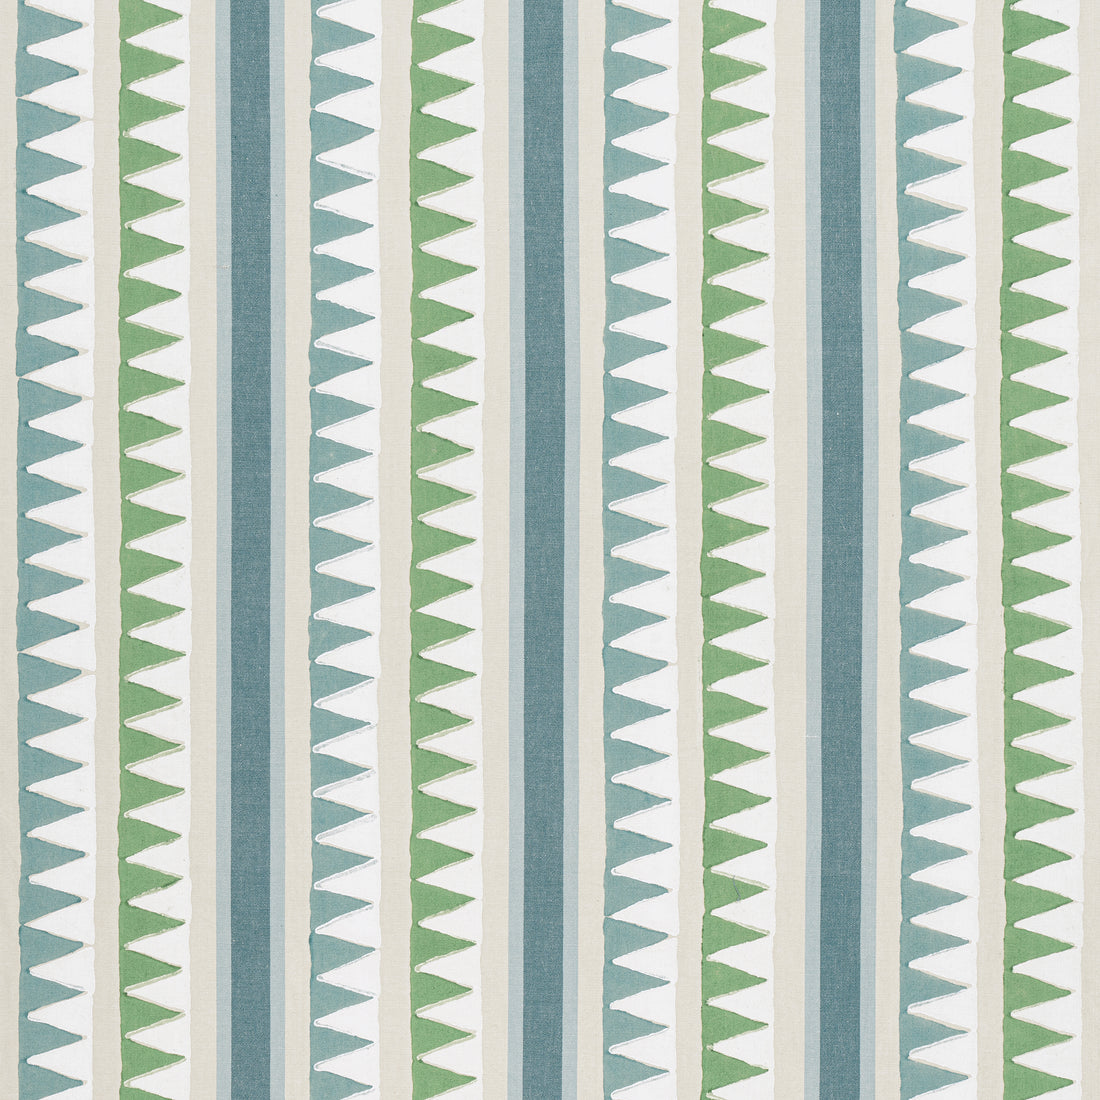 Lomita Stripe fabric in green and blue color - pattern number F916236 - by Thibaut in the Kismet collection